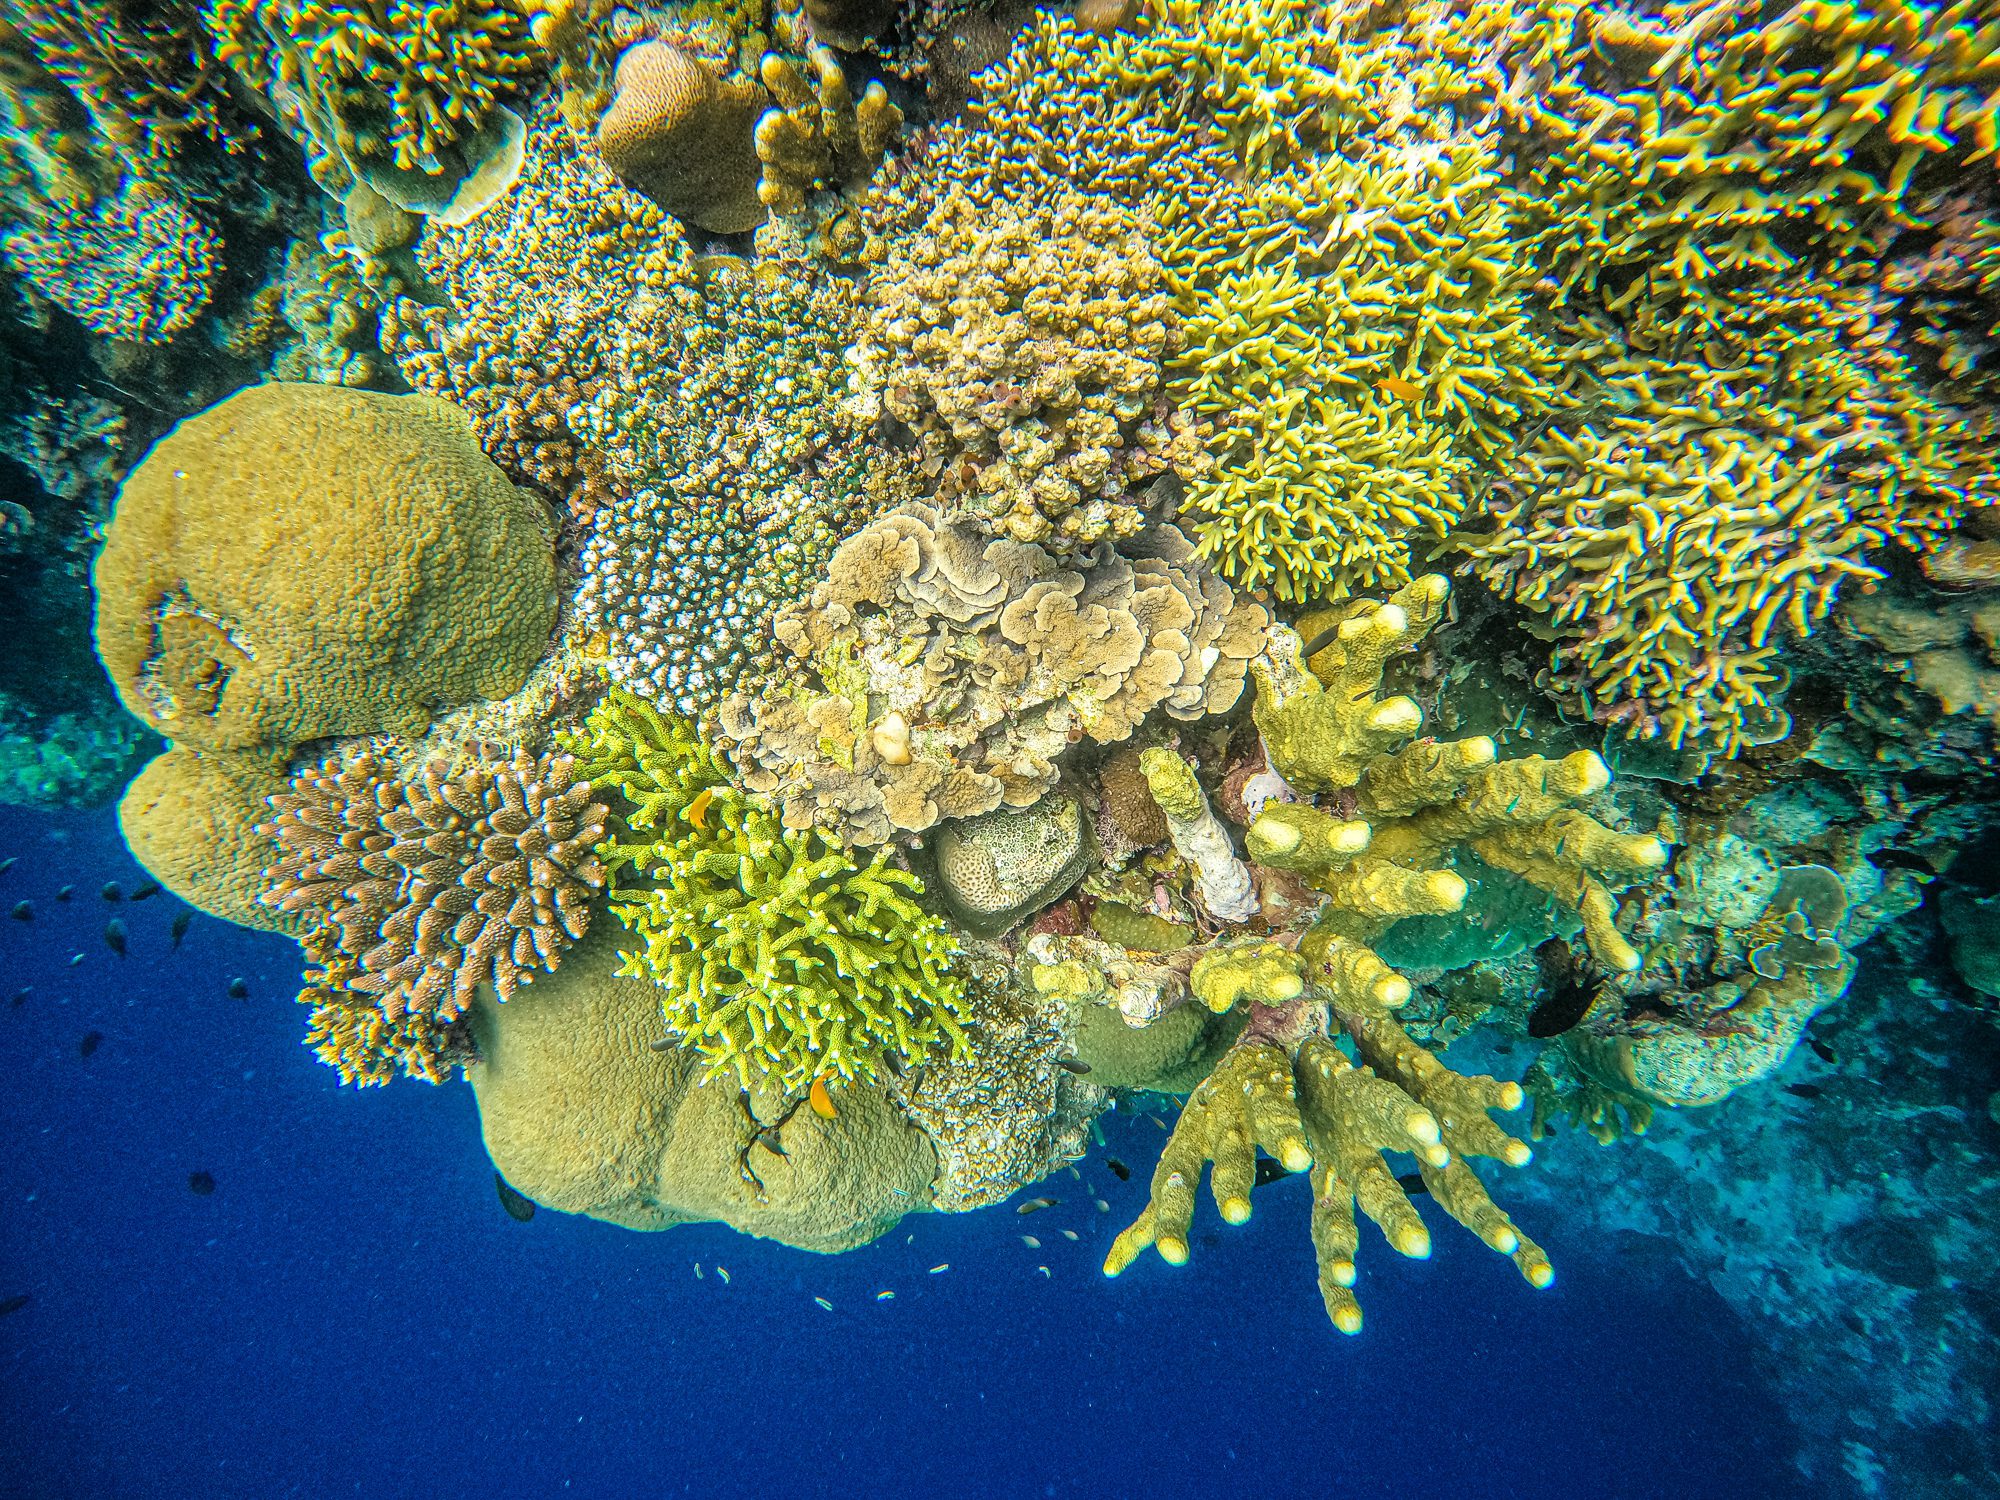 A cluster of hard and soft coral reefs on the coral walls around Bunaken Island